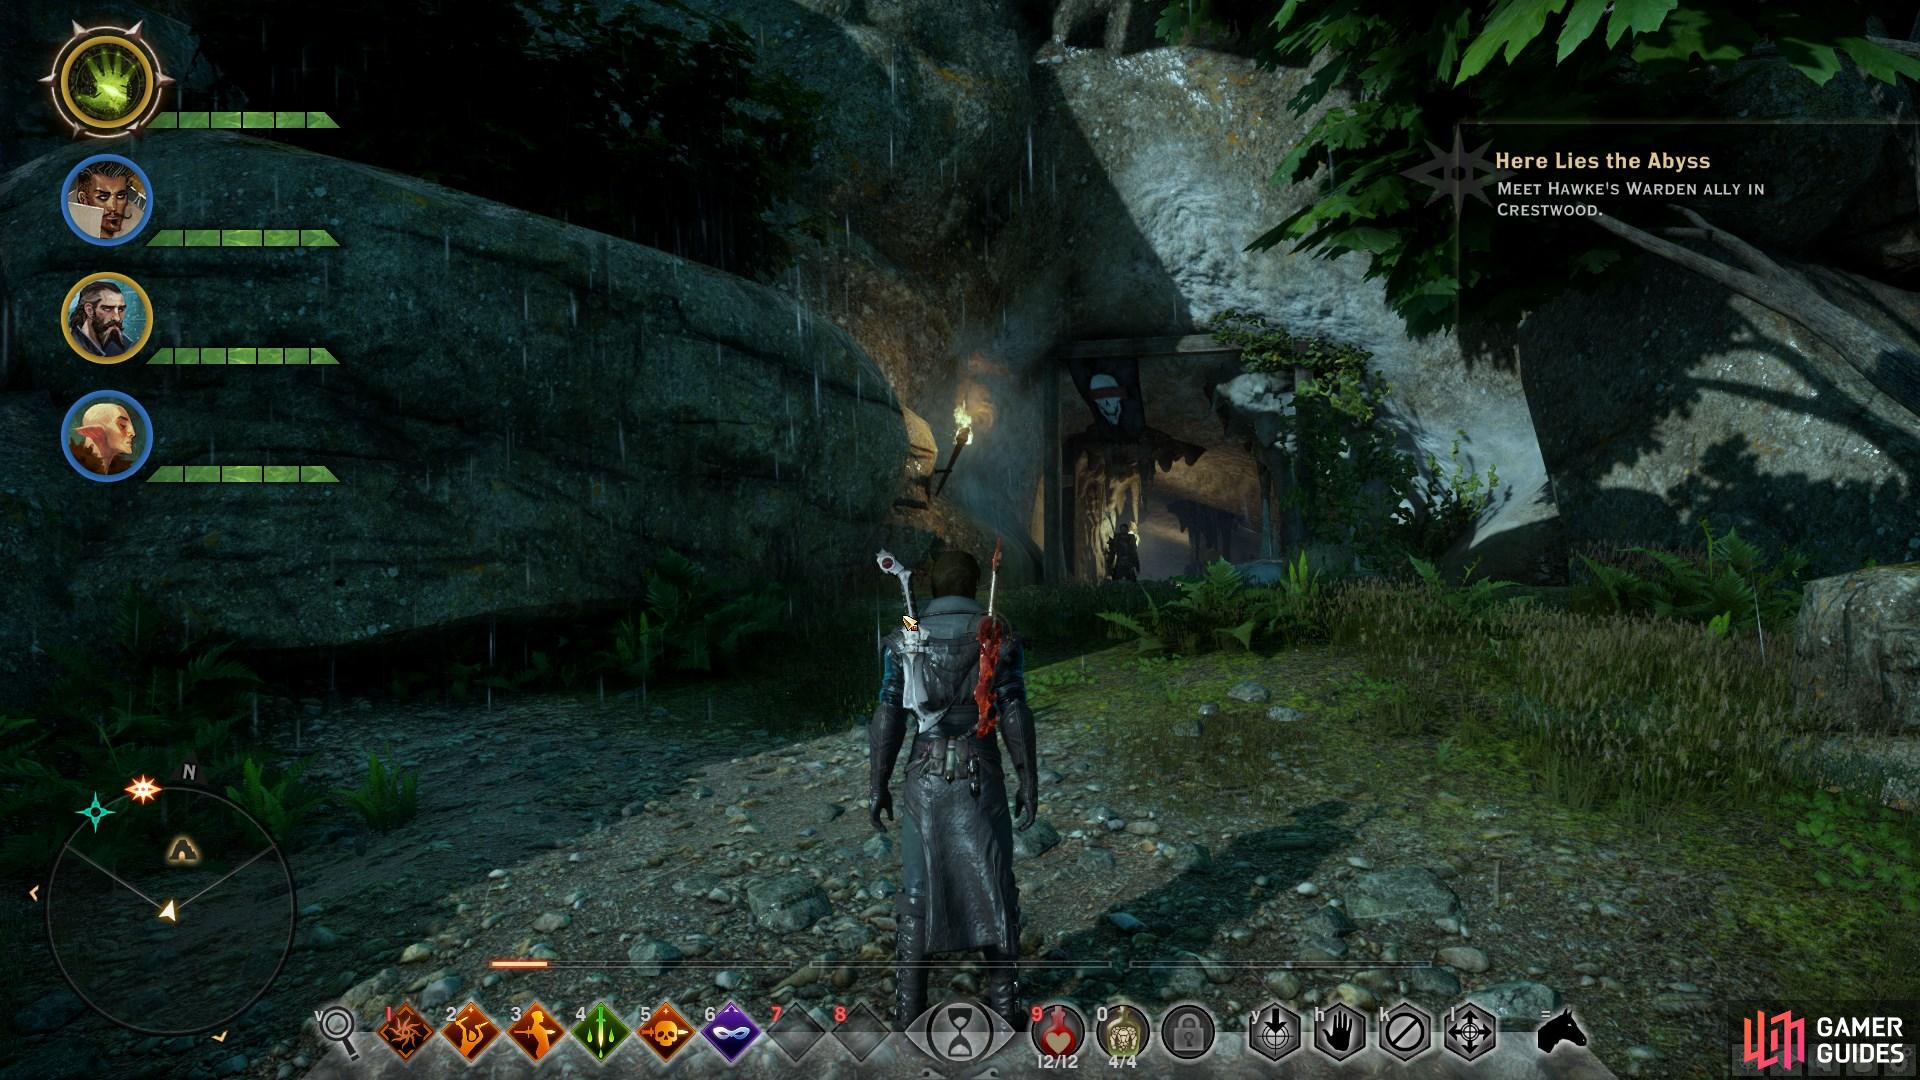 Speak with Hawke outside the cave entrance.